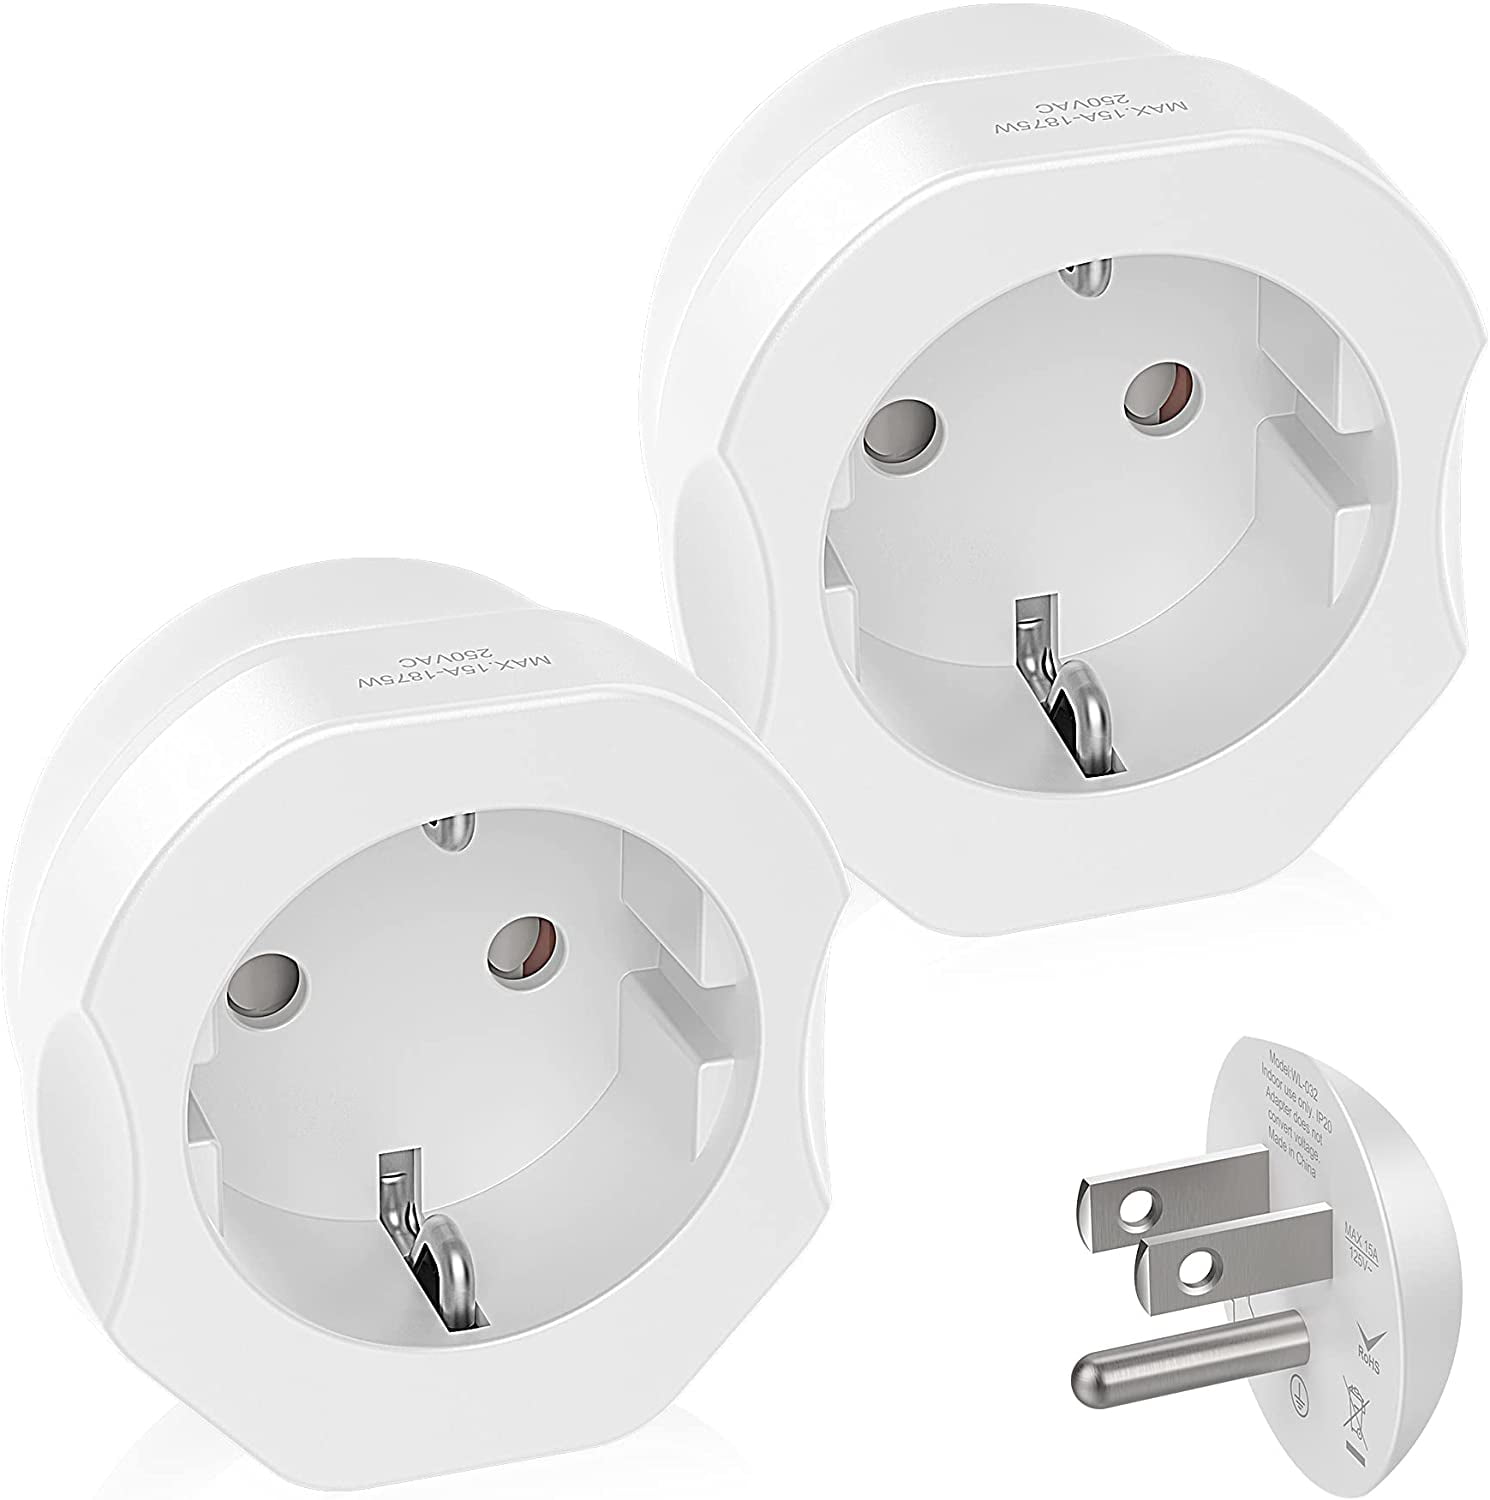 Details about   Wall AC Power Plug Adapter Converter EU Europe to US USA Adaptor Travel Charger 